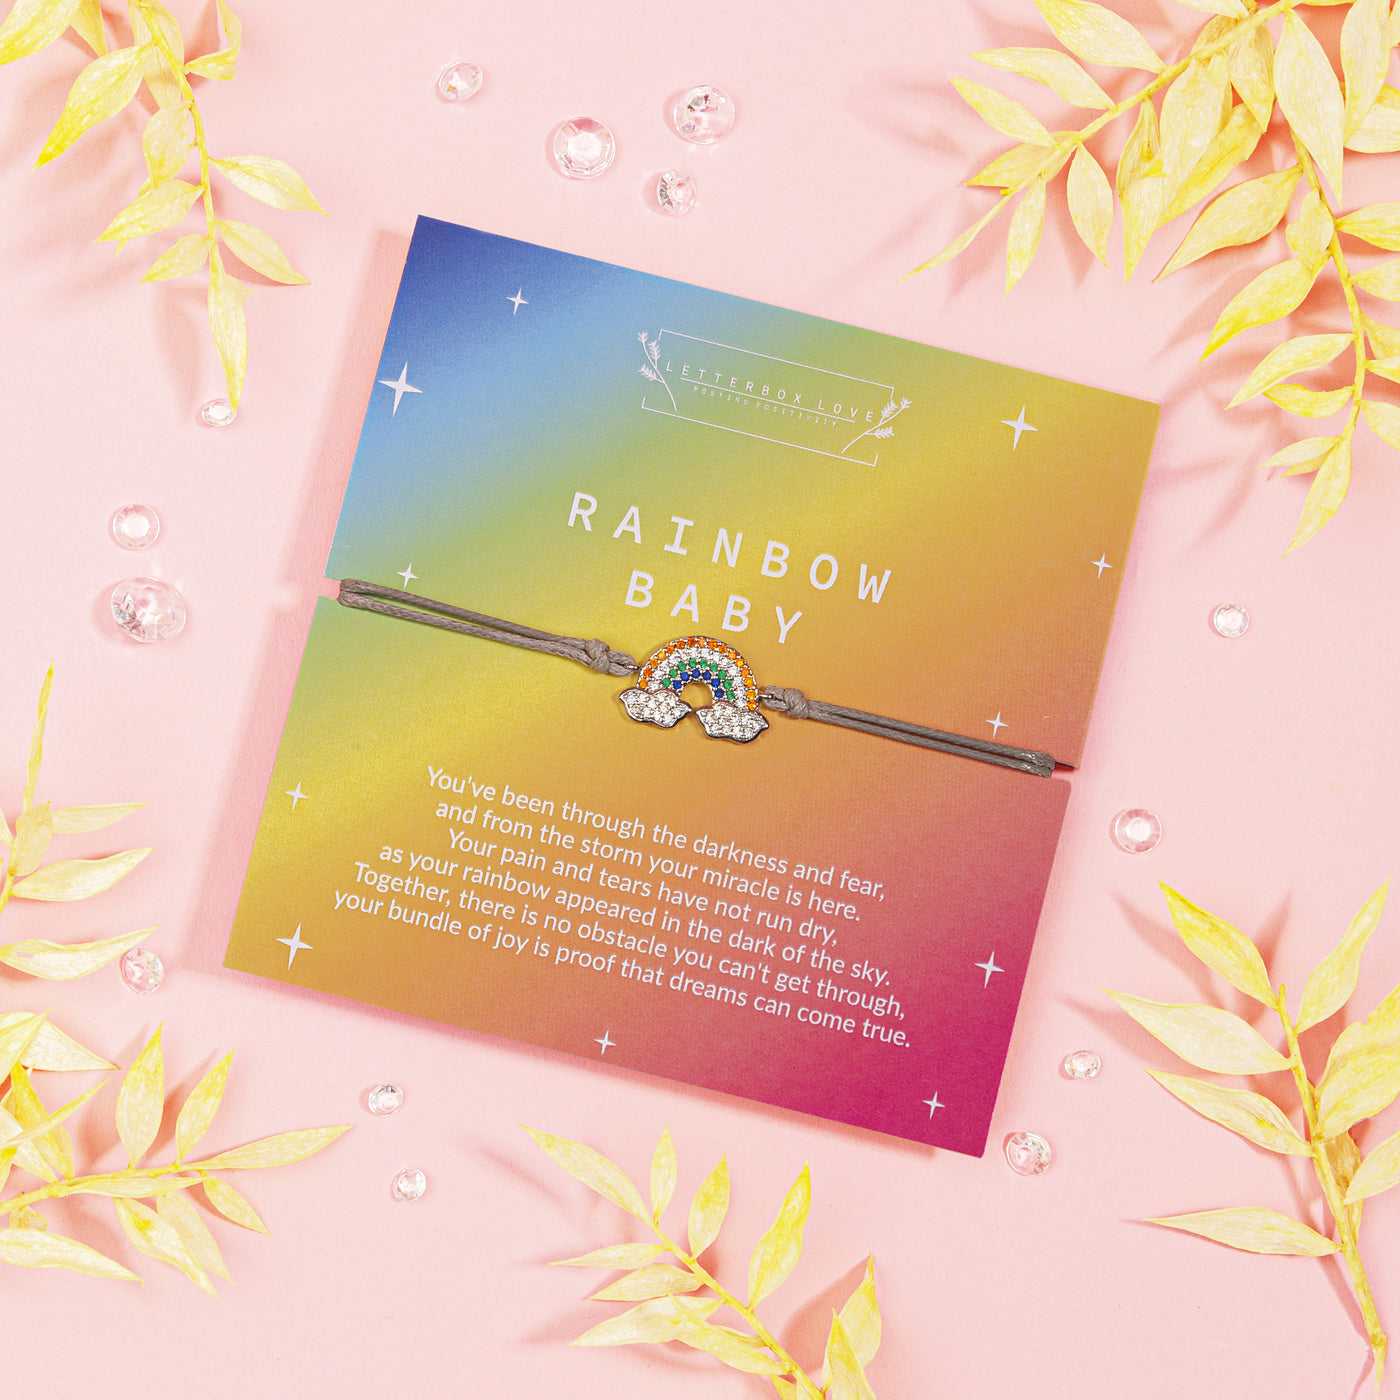 Vibrant card titled 'RAINBOW BABY' featuring a touching message about hope and miracles, accompanied by a delicate bracelet with a sparkling rainbow charm. The card, with gradient hues of a sunset.